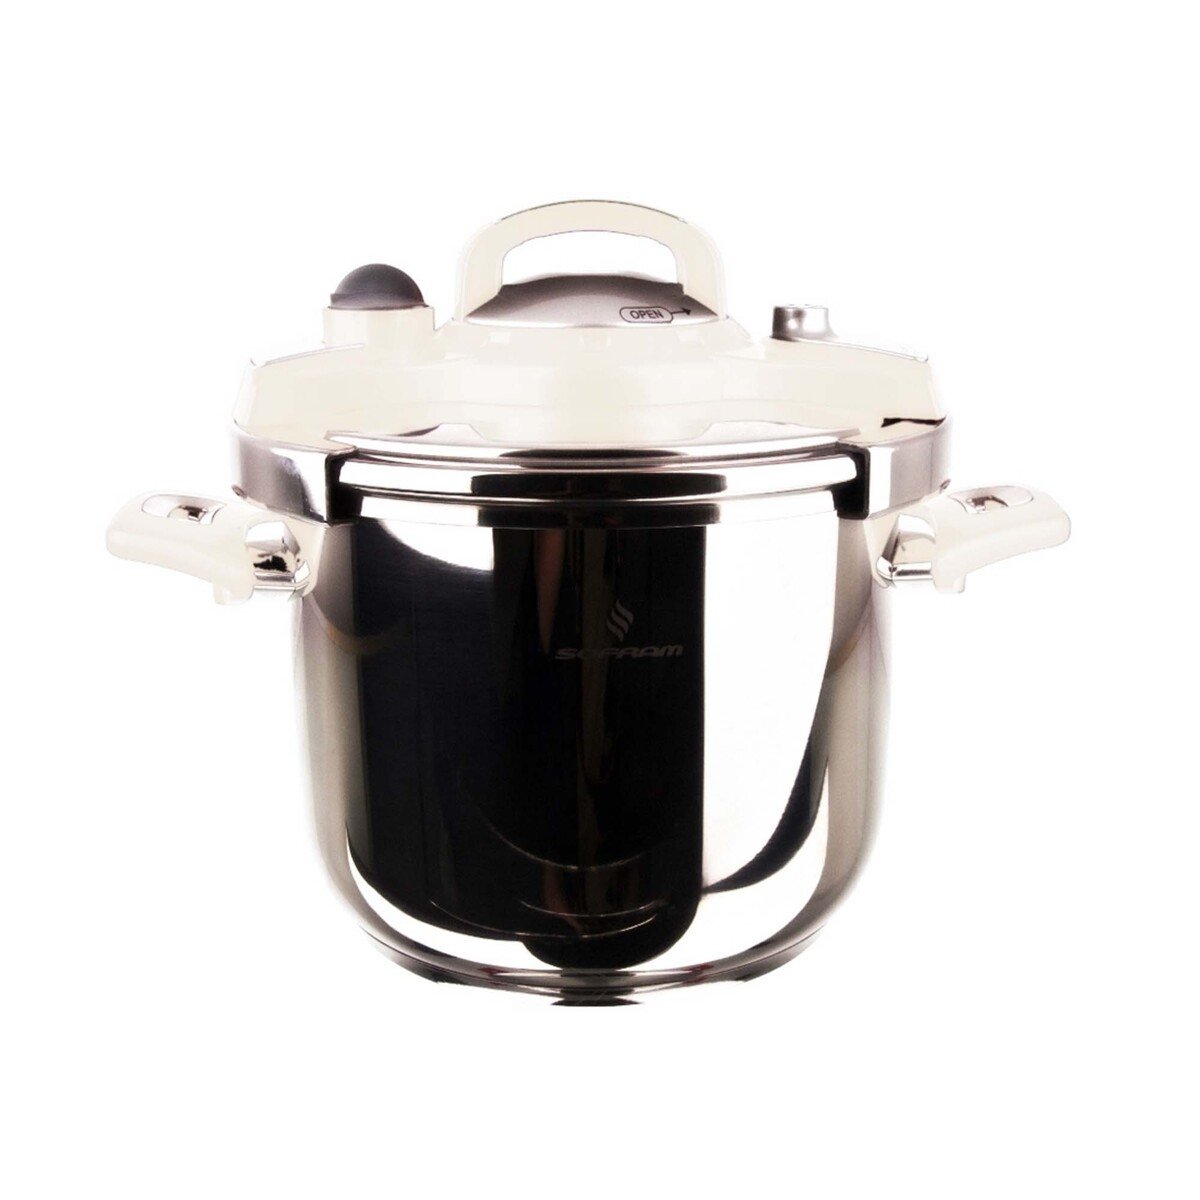 Sofram Stainless Steel Pressure Cooker 8Ltr Assorted Colors